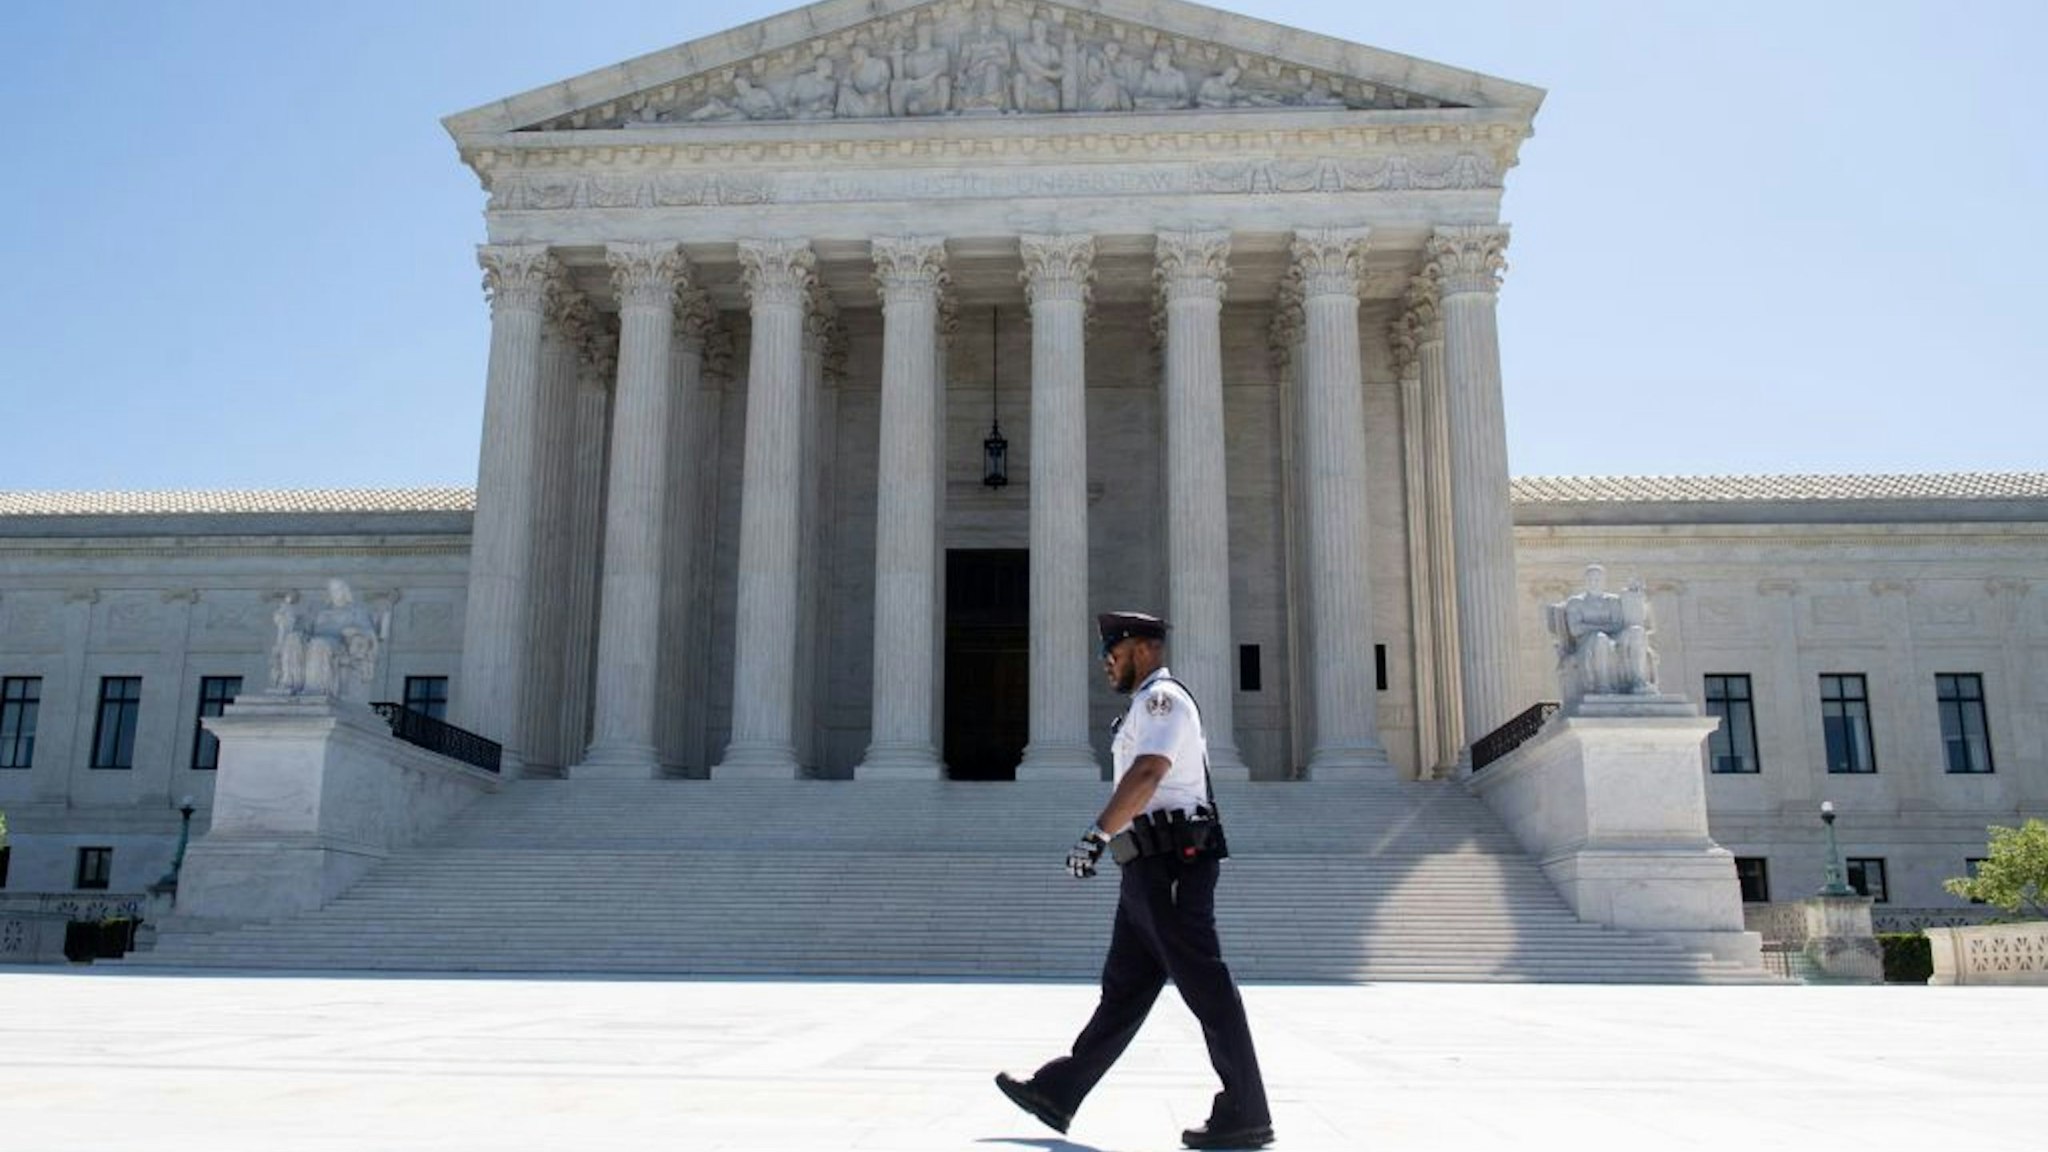 The US Supreme Court is seen in Washington, DC, on May 4, 2020, during the first day of oral arguments held by telephone, a first in the Court's history, as a result of COVID-19, known as coronavirus.